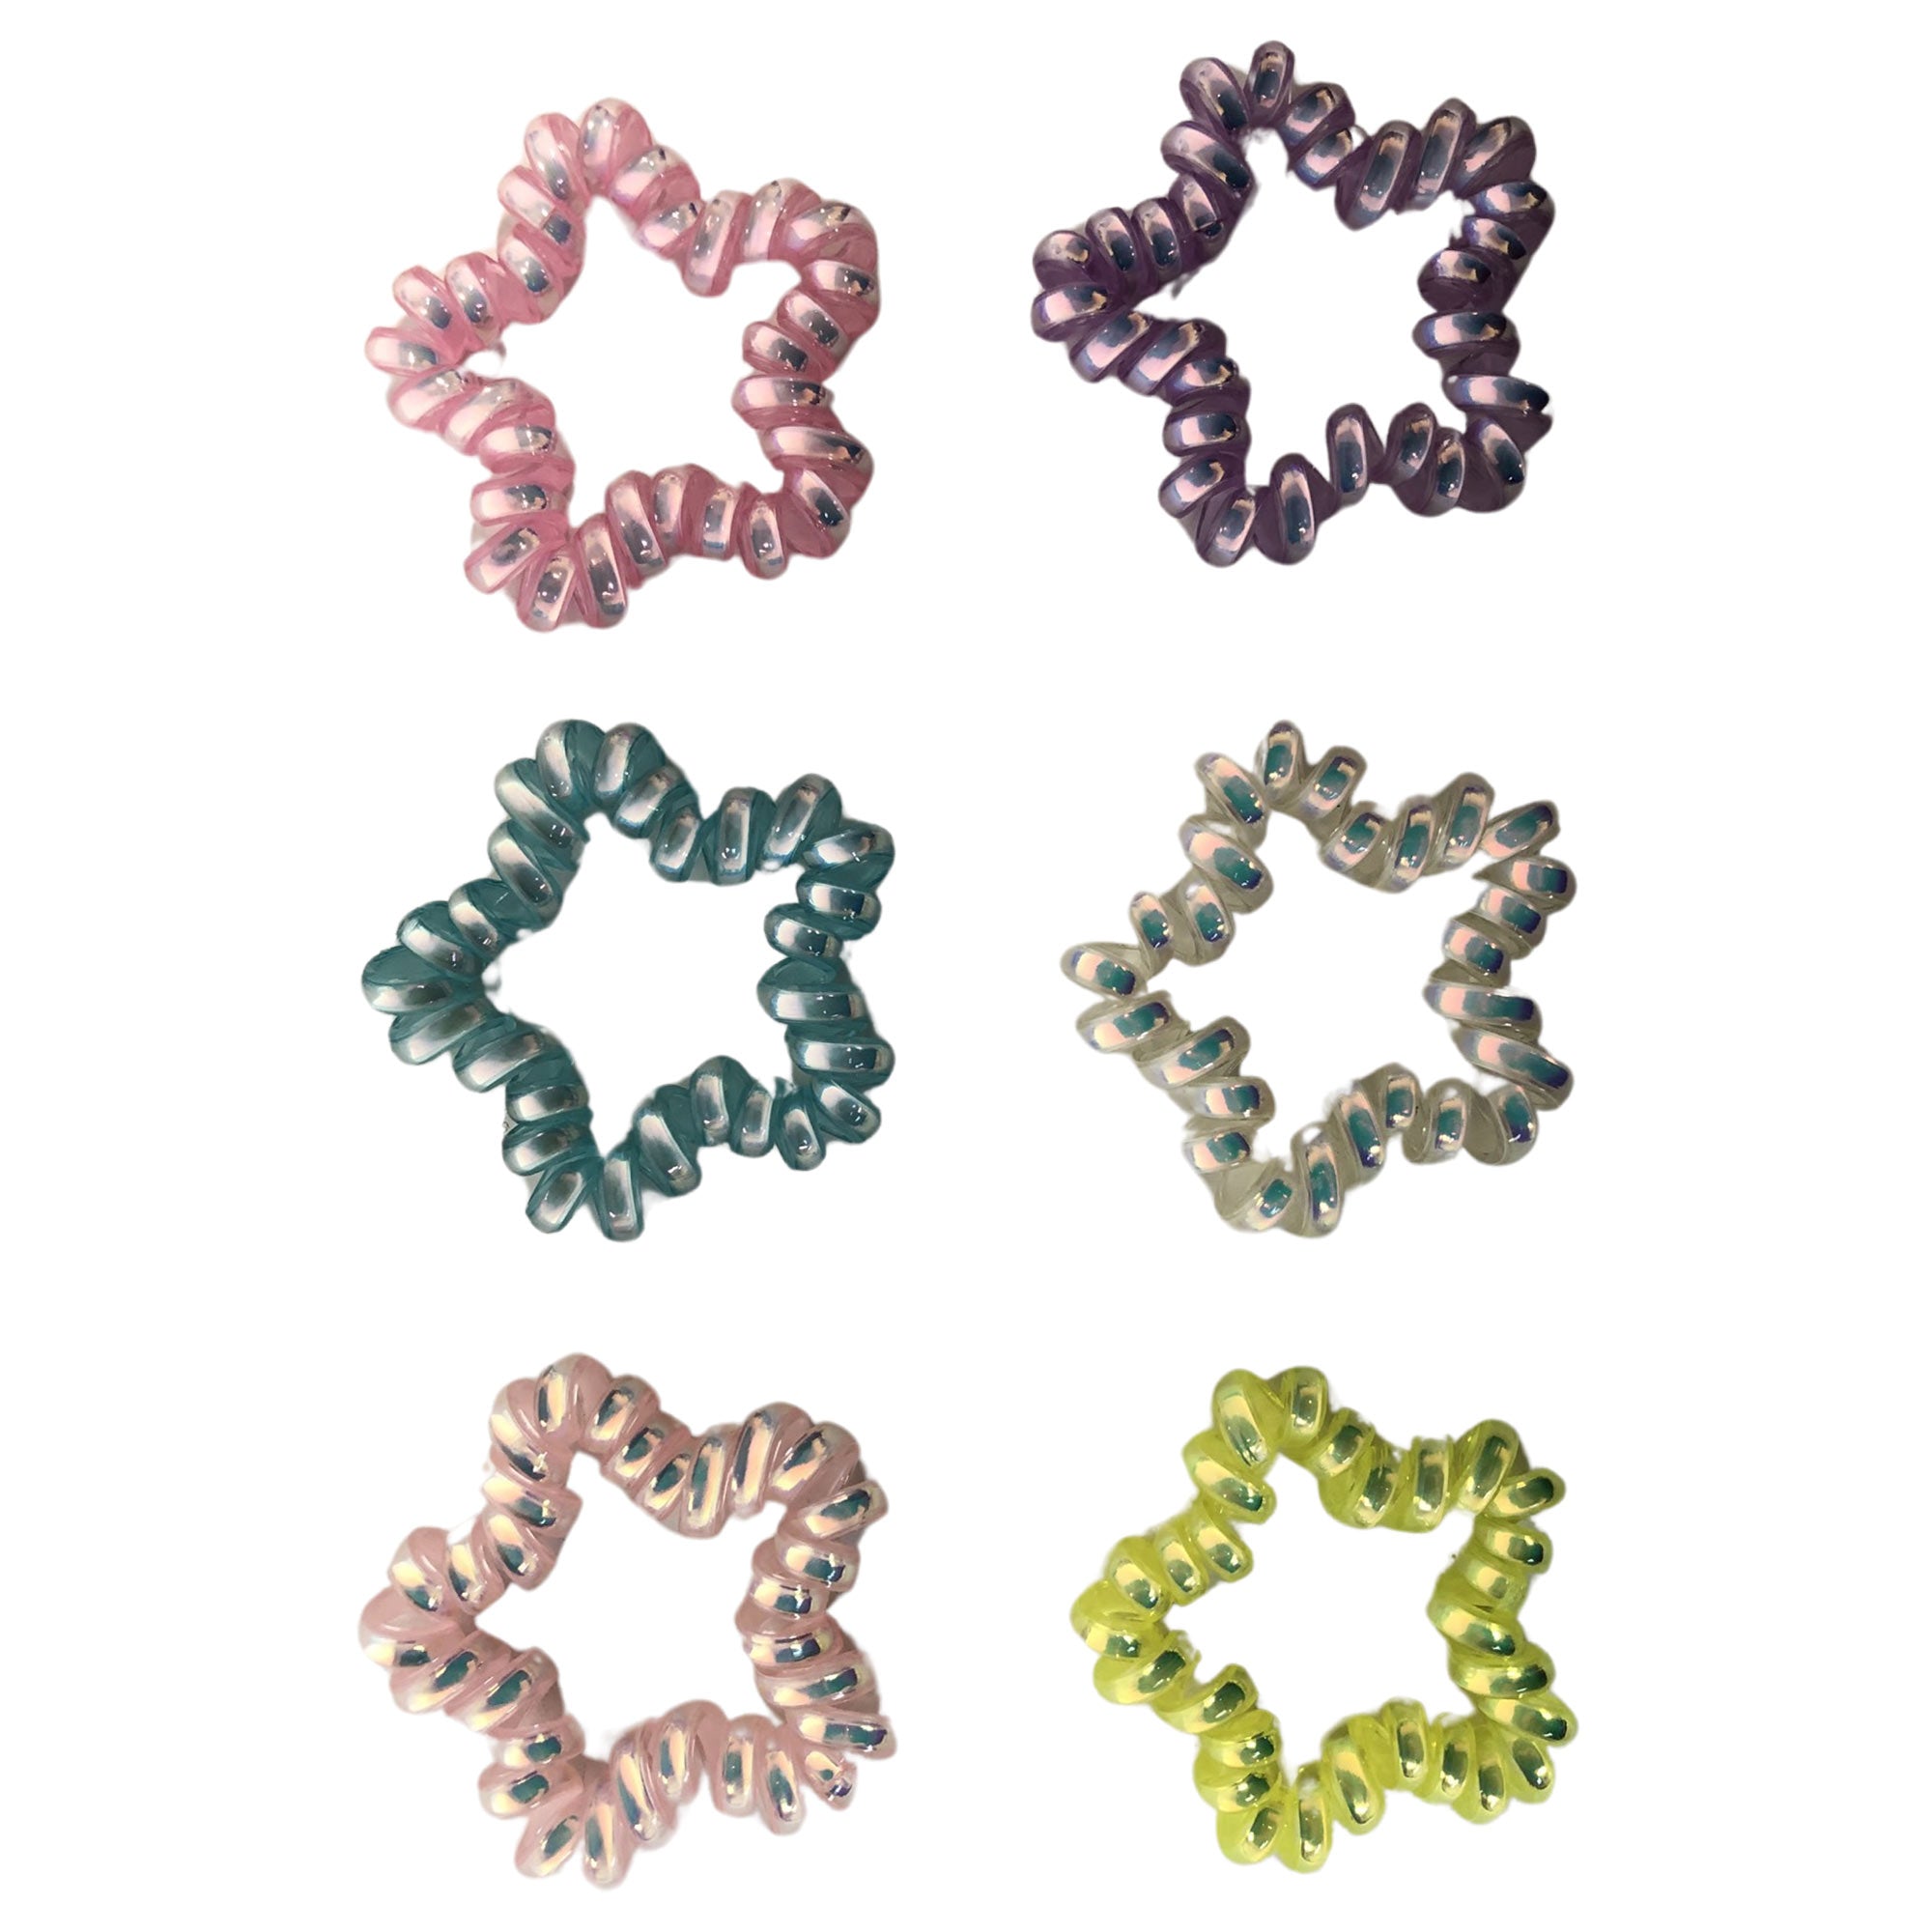 CLEARANCE CORDED HAIR TIES - 6 IN A CAN (CASE OF 36 - $2.00 / PIECE)  Wholesale Hair Ties Star Shaped SKU: 84114-36